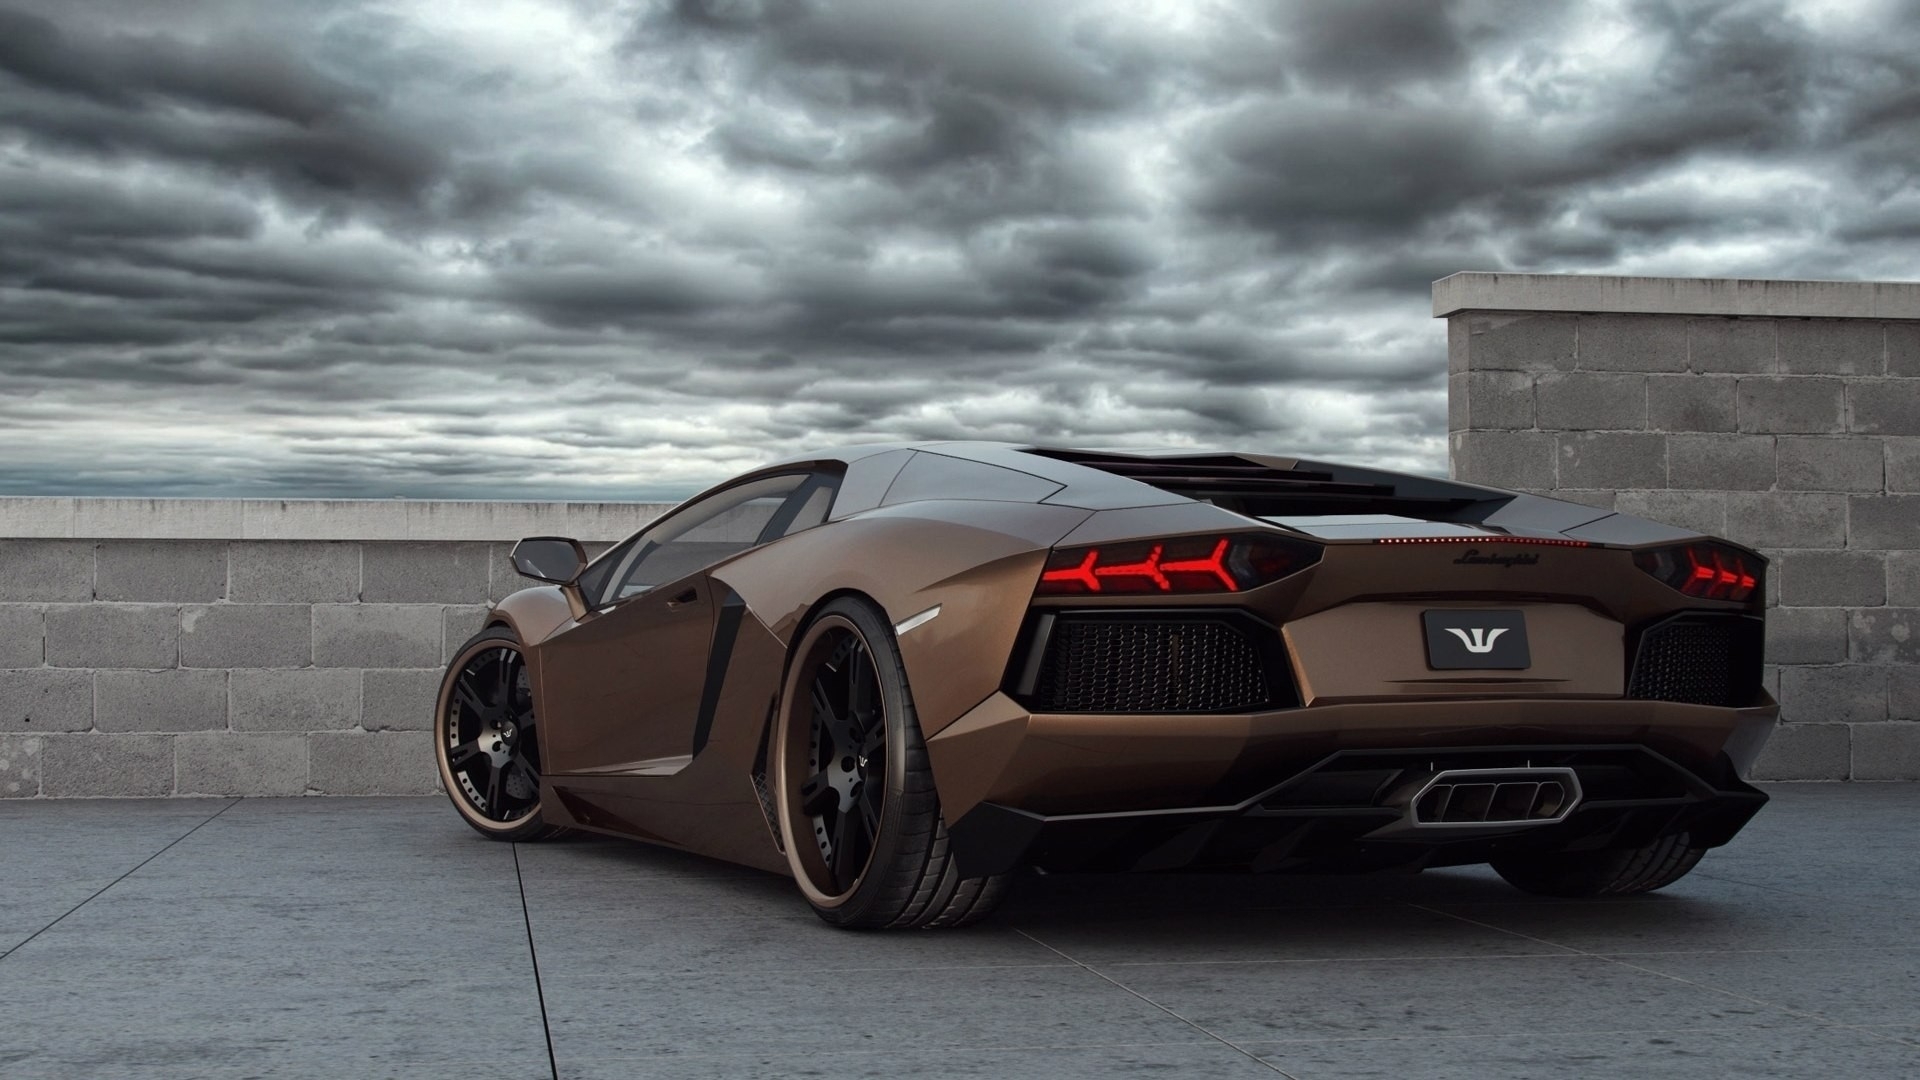 10 Top Hd Car Wallpapers 1920X1080 FULL HD 1920×1080 For PC Background